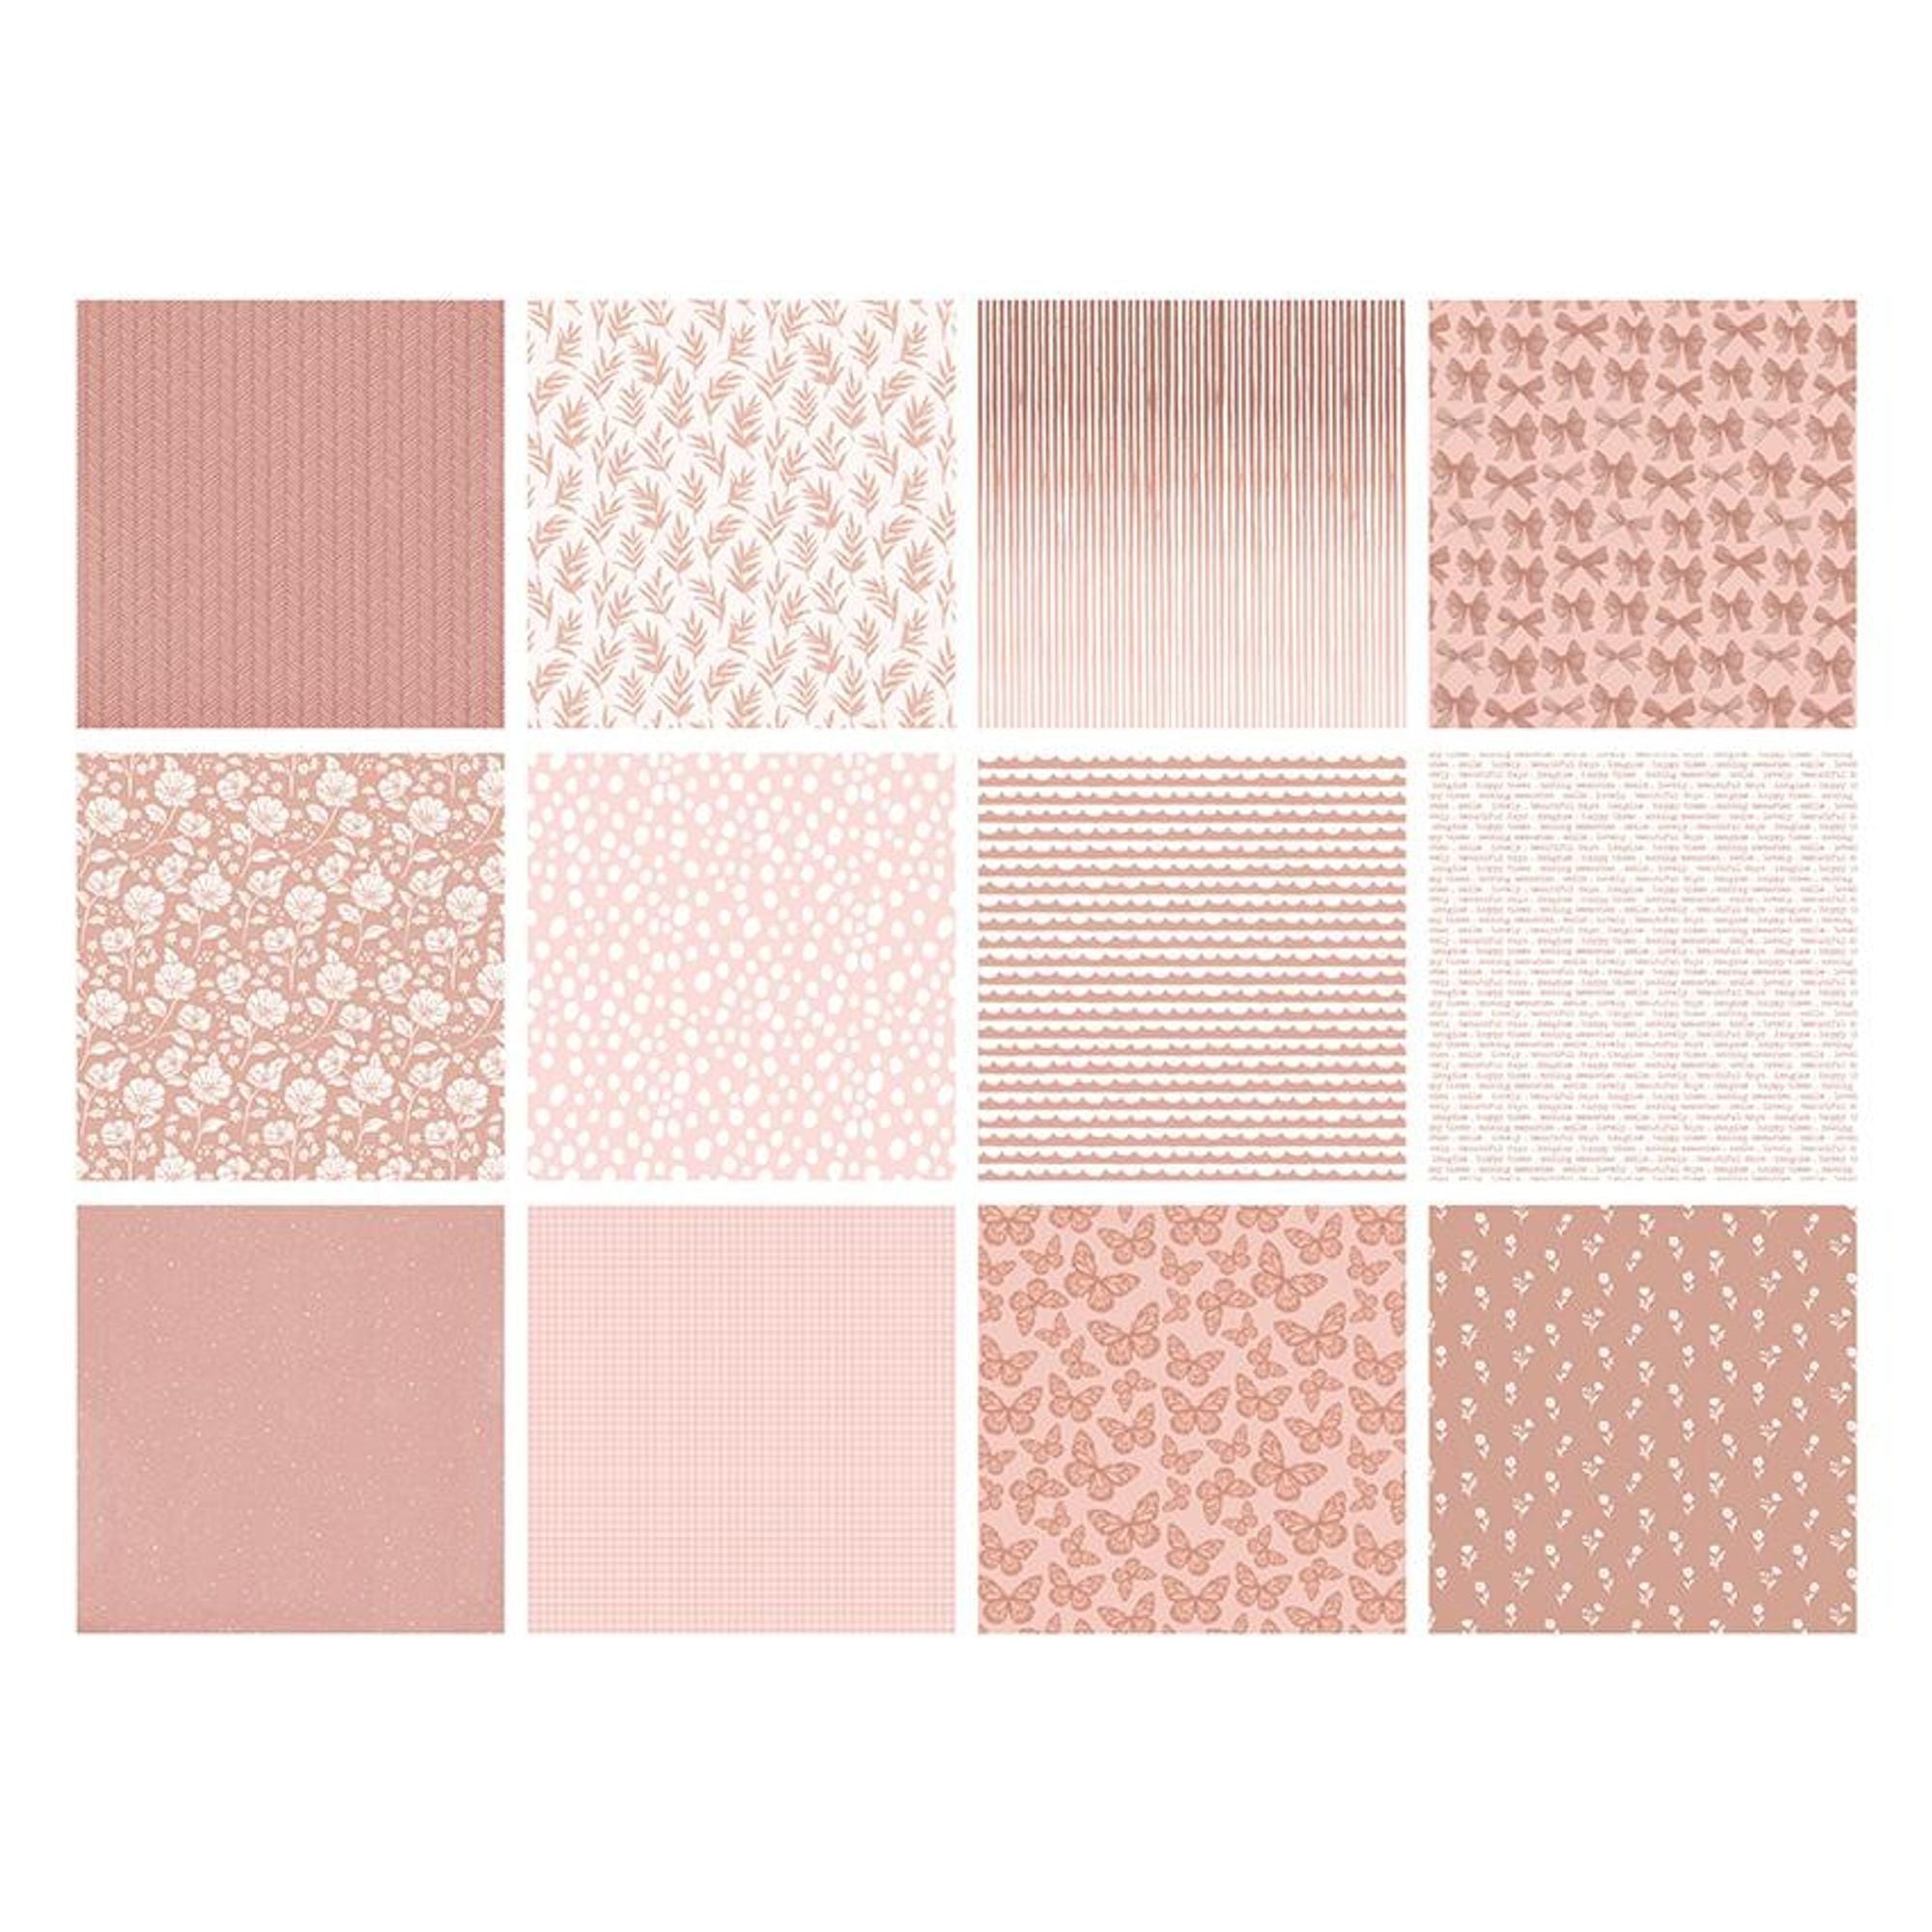 The Paper Boutique Everyday - Shades Of - Blush 8 in x 8 in Pad